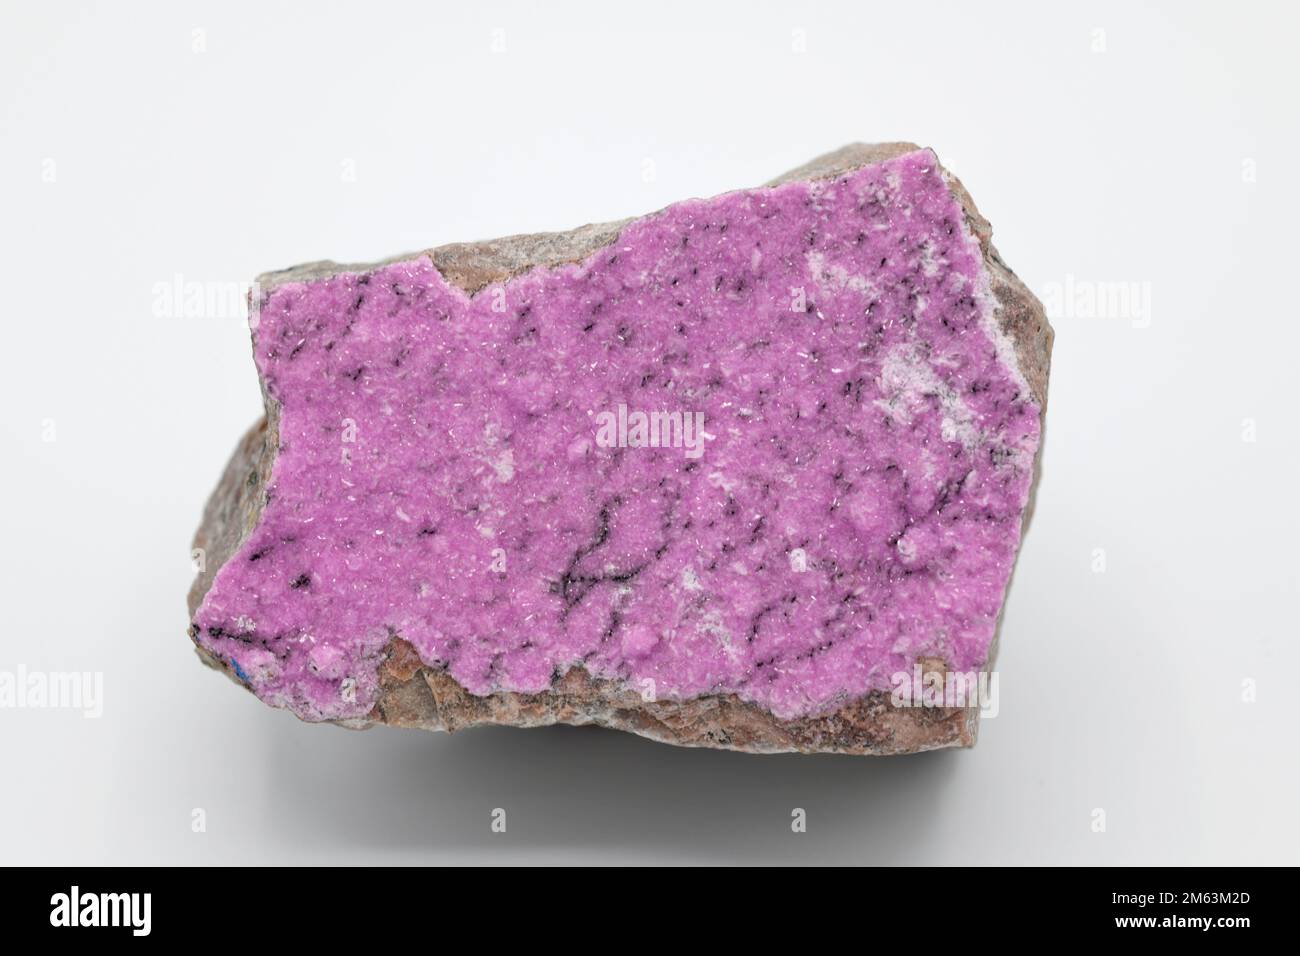 Cobaltite or cobaltocalcite is a variety of calcite rich on cobalt. This sample comes from China. Stock Photo